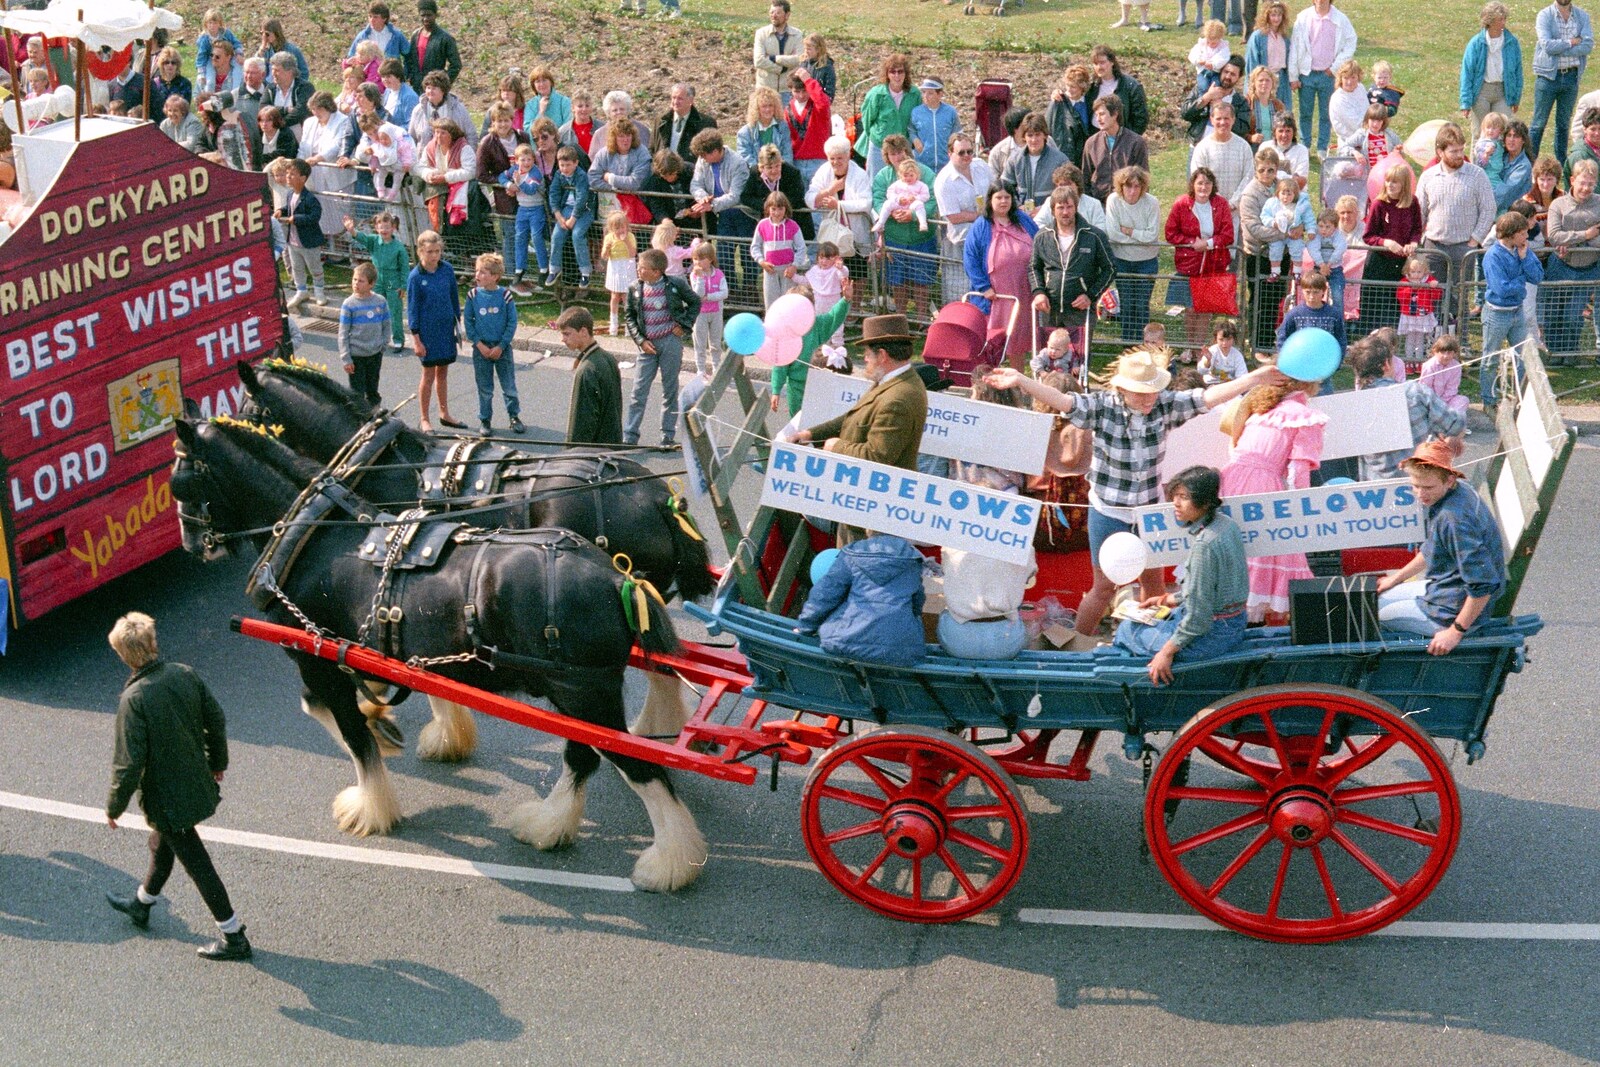 A Rumbelows cart and heavy horses from Chantal and Andy's Wedding, and the Lord Mayor's Parade, Plymouth - 20th May 1987